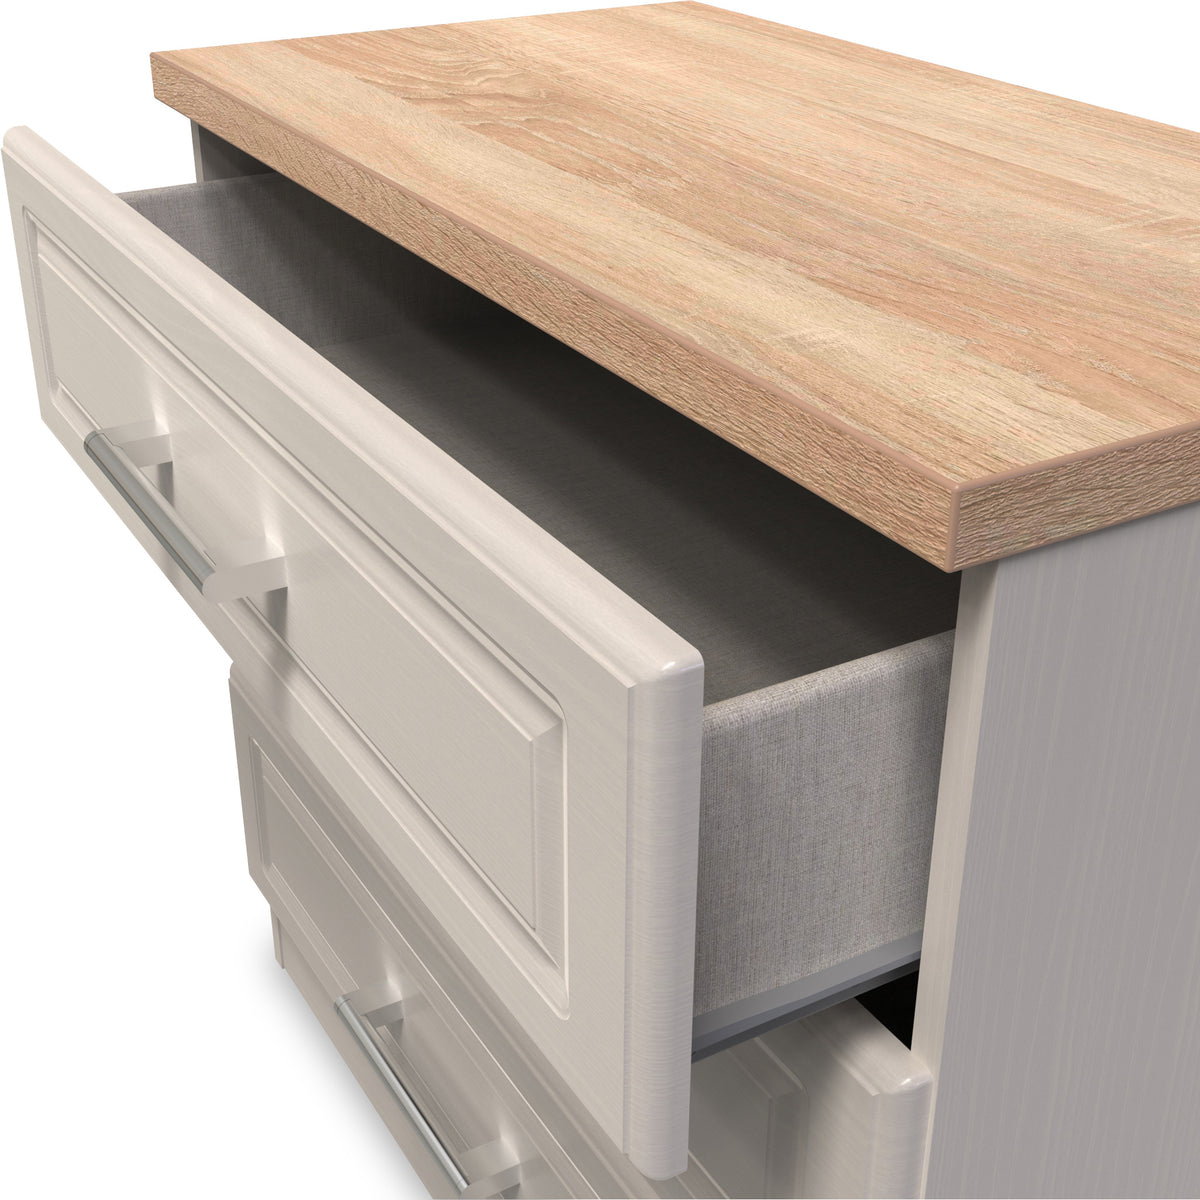 Talland Taupe 3 Drawer Chest by Roseland Furniture